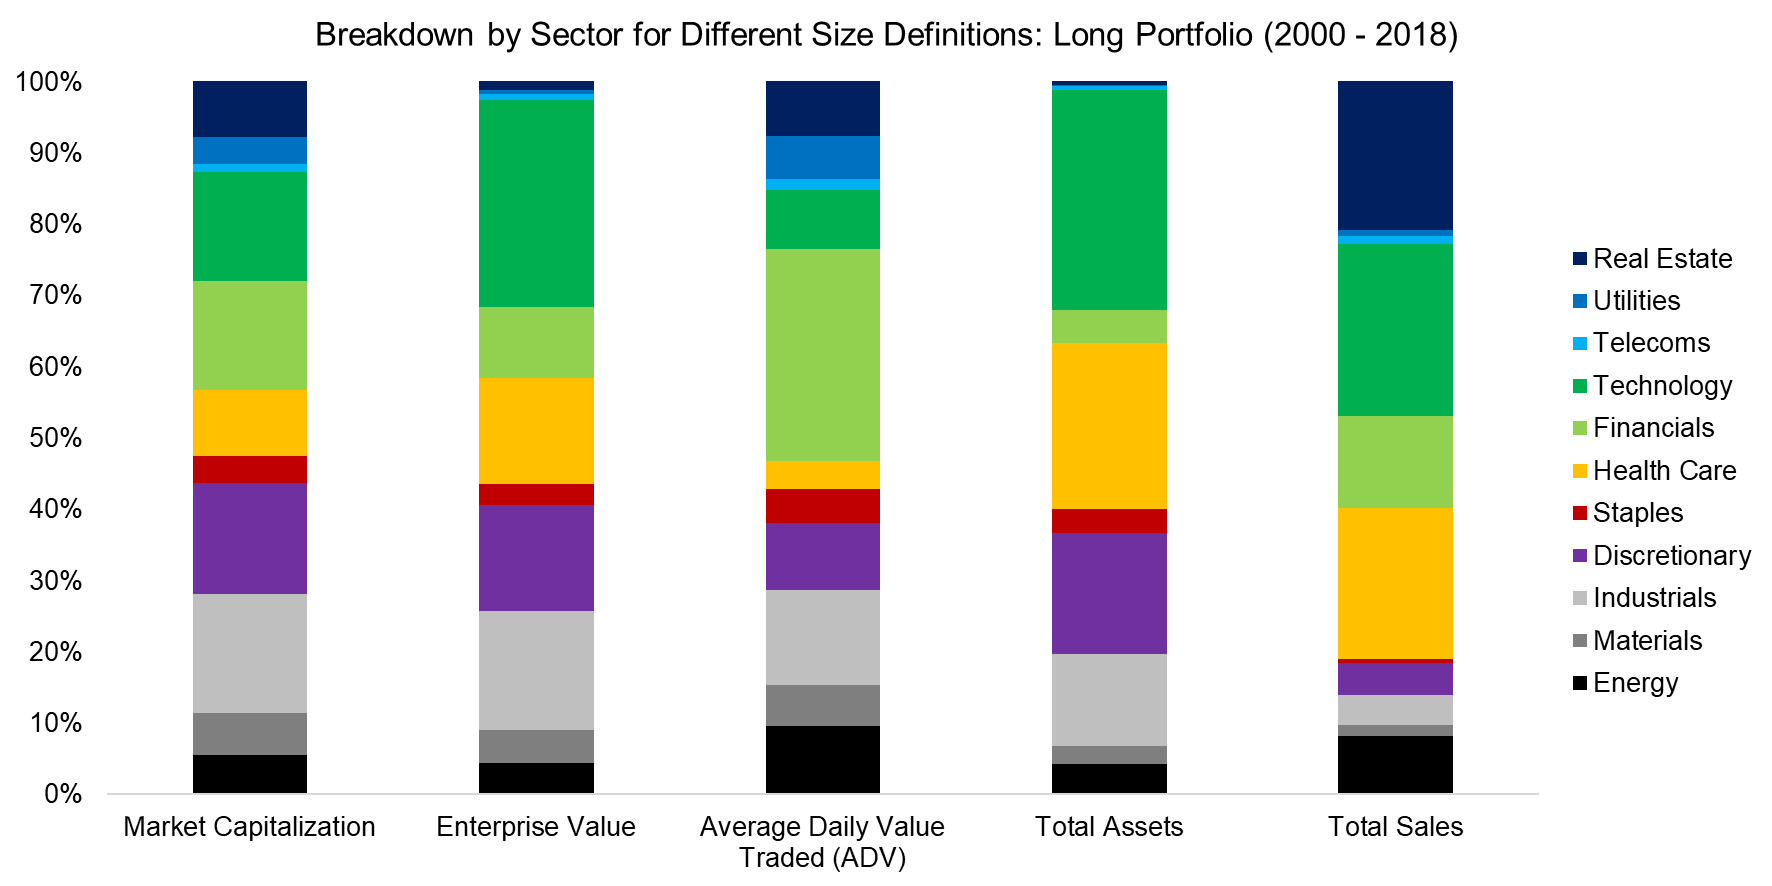 Breakdown by Sector for Different Size Definitions Long Portfolio (2000 - 2018)